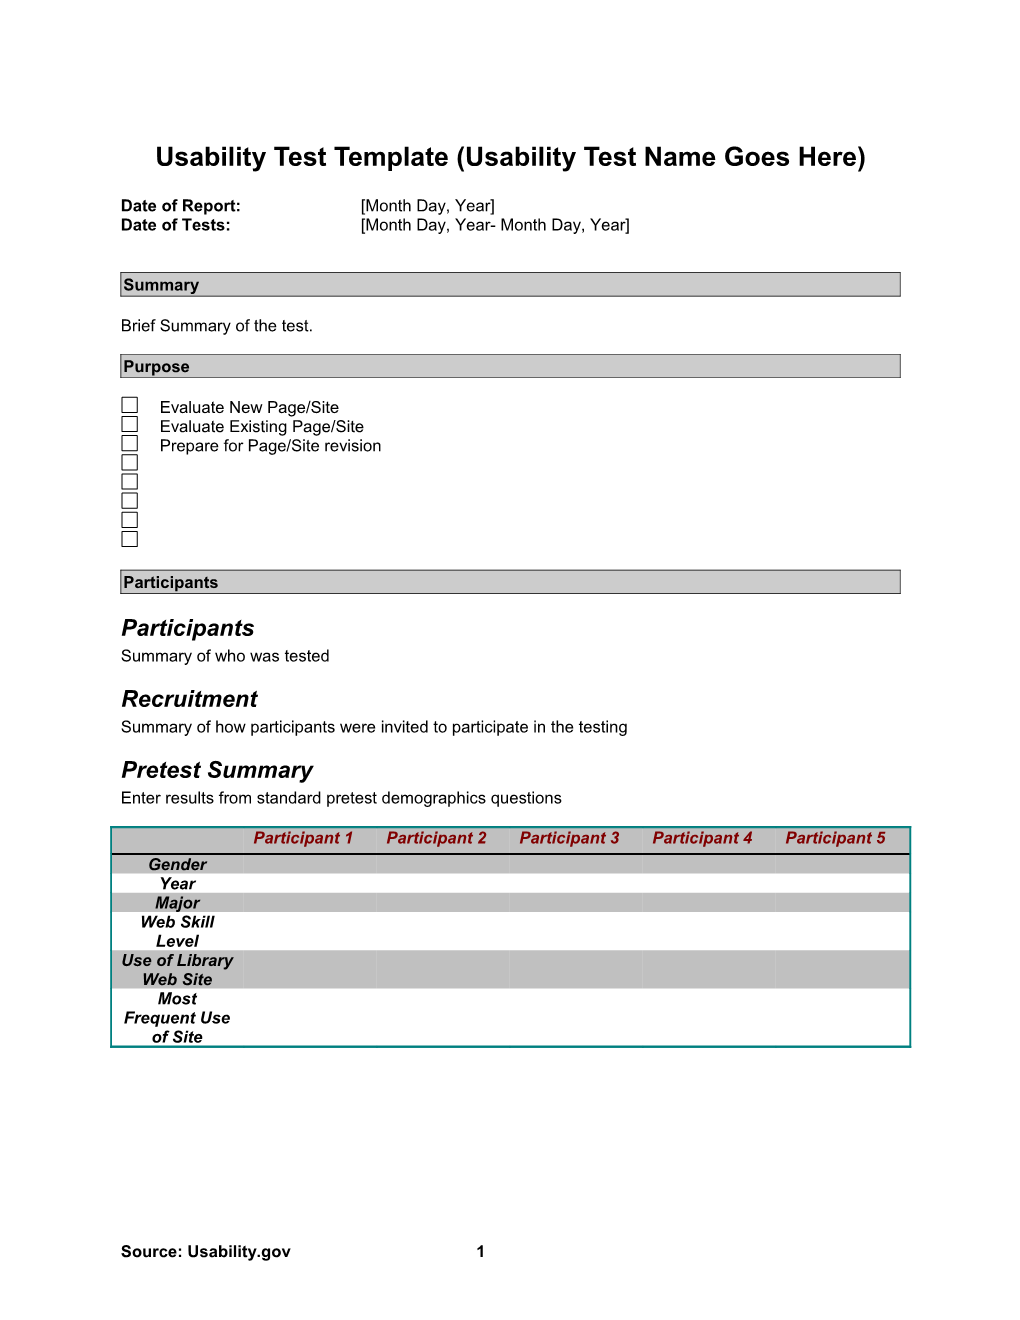 Short Usability Test Report